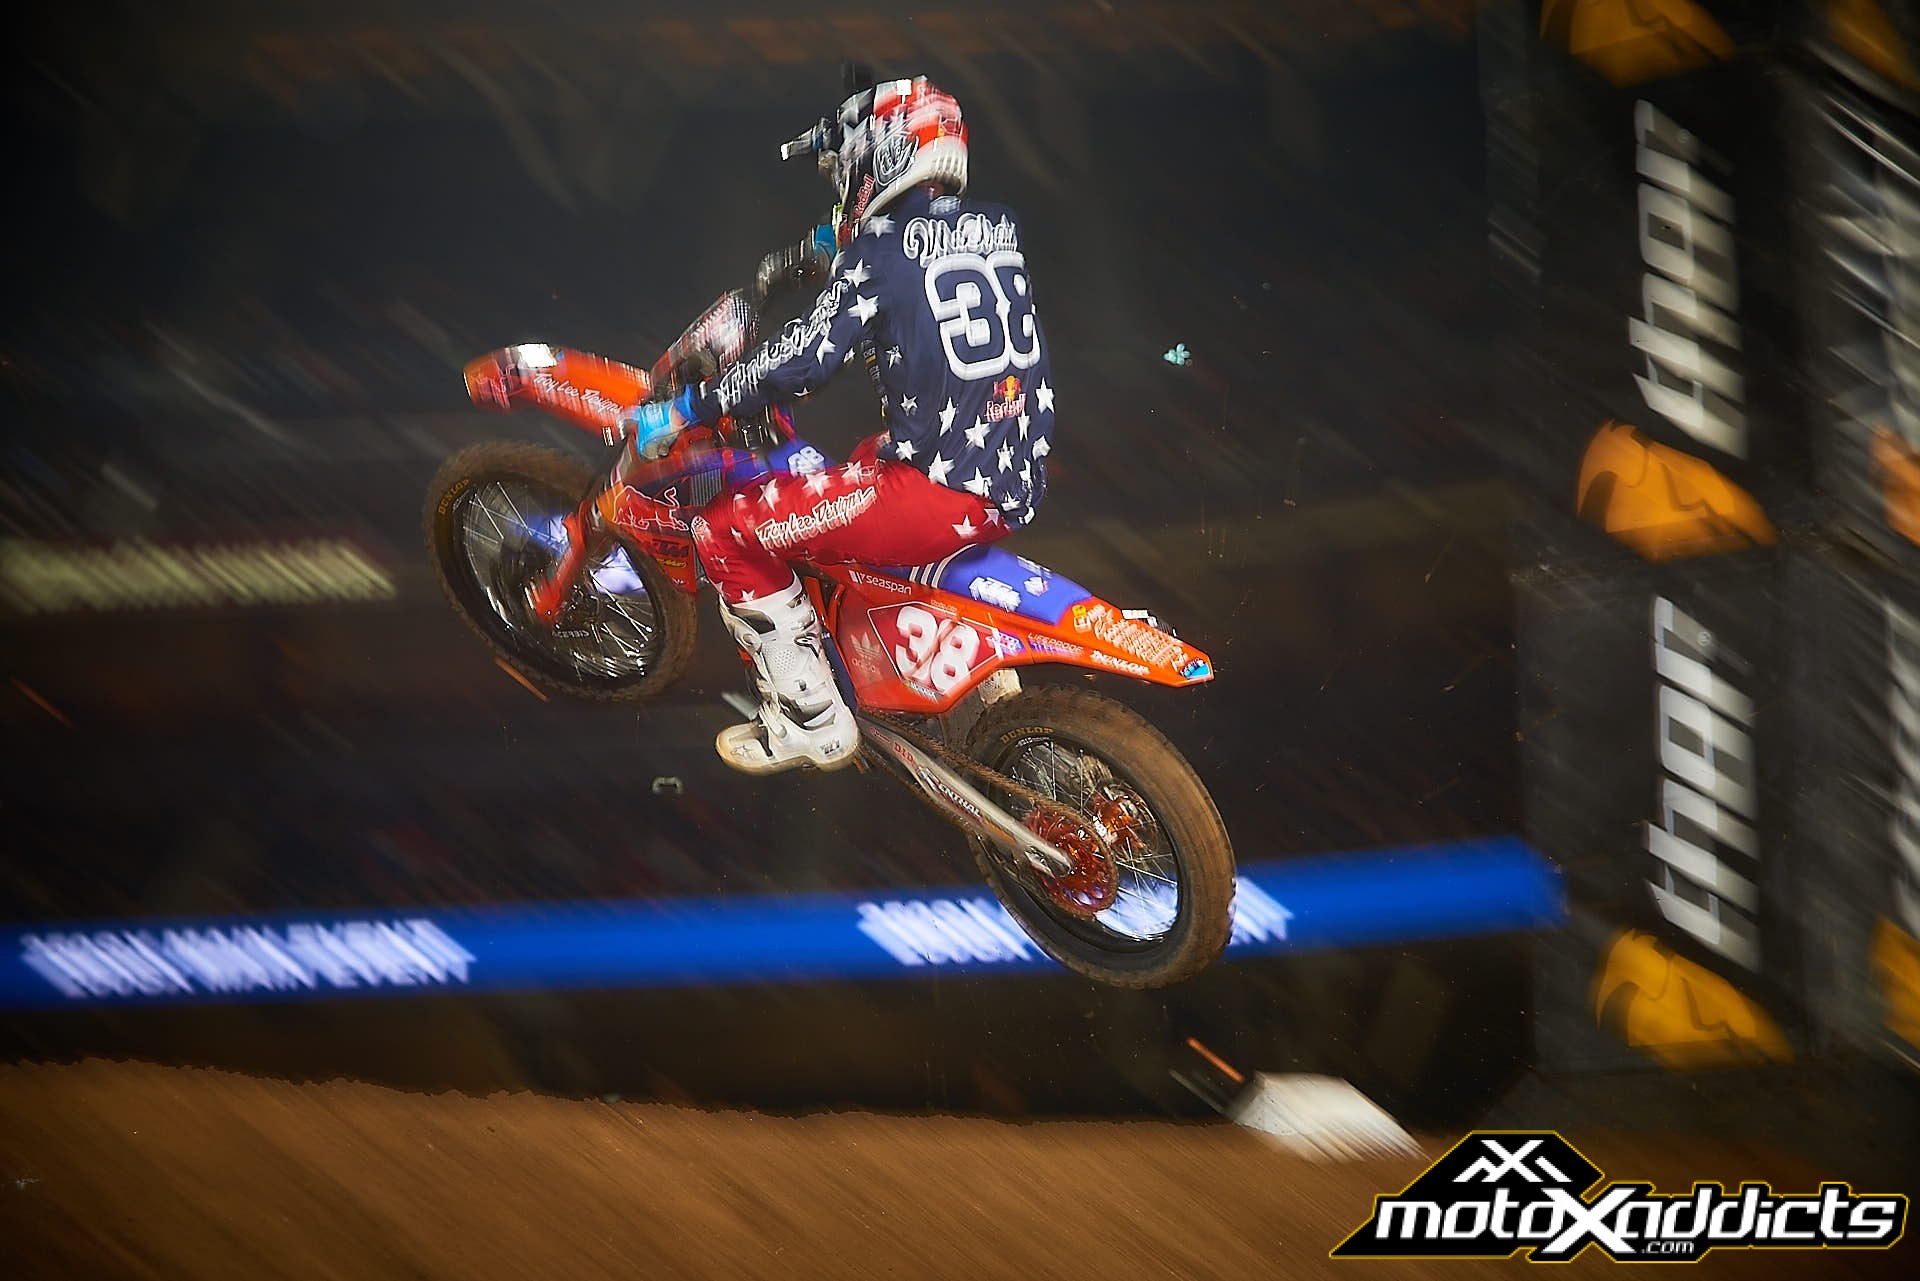 Shane McElrath carries an eight point lead in the 250SX championship heading into A2. 